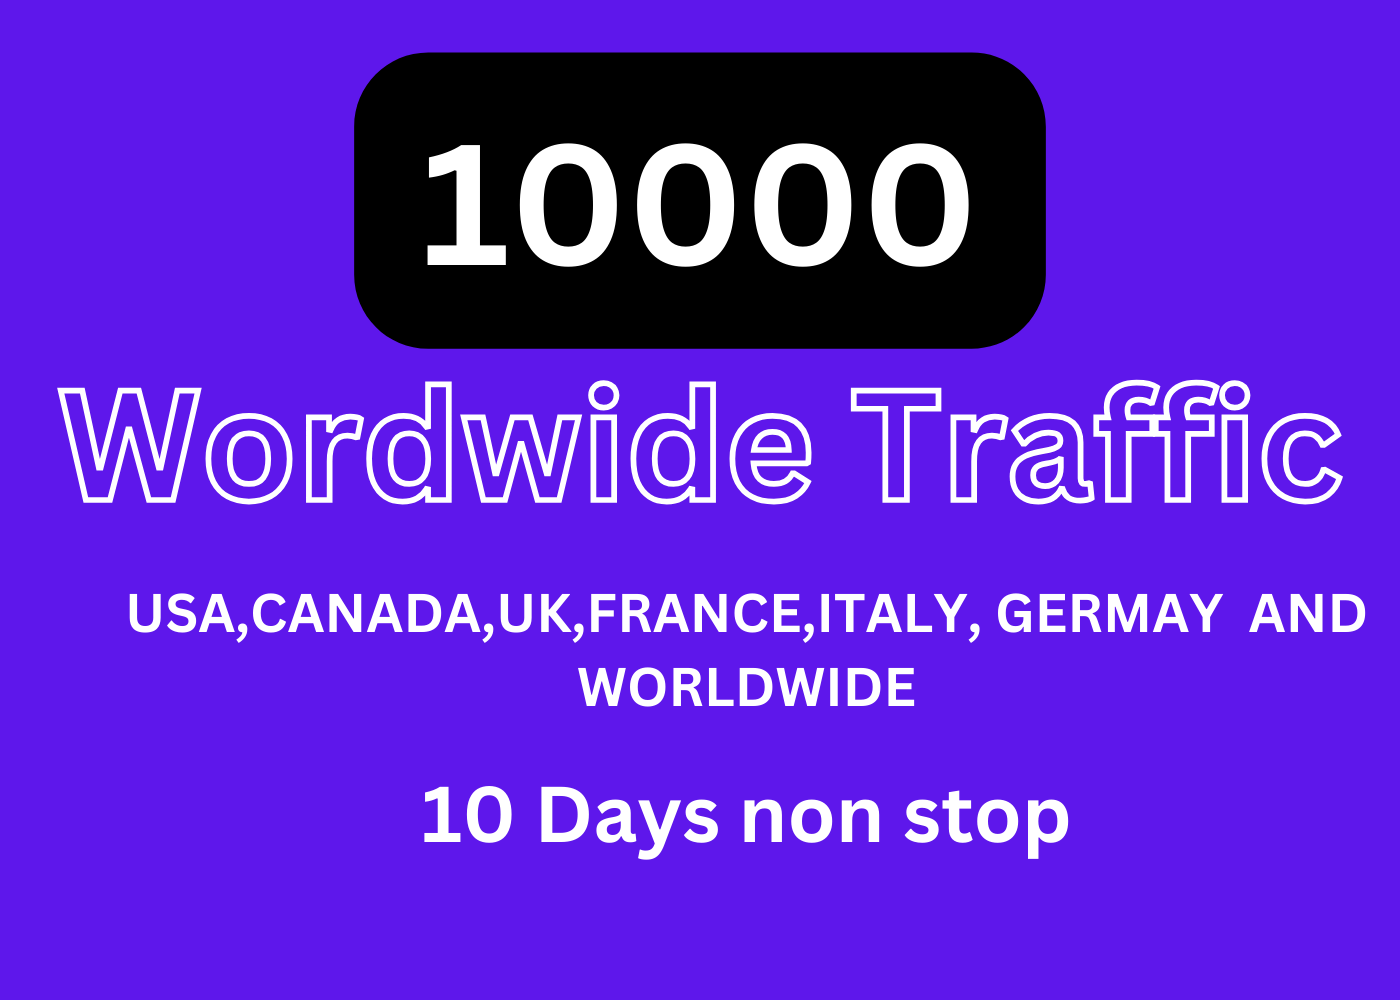 10000 USA, CANADA, UK,FRANCE,GERMANY, TALY and Worldwide Traffic